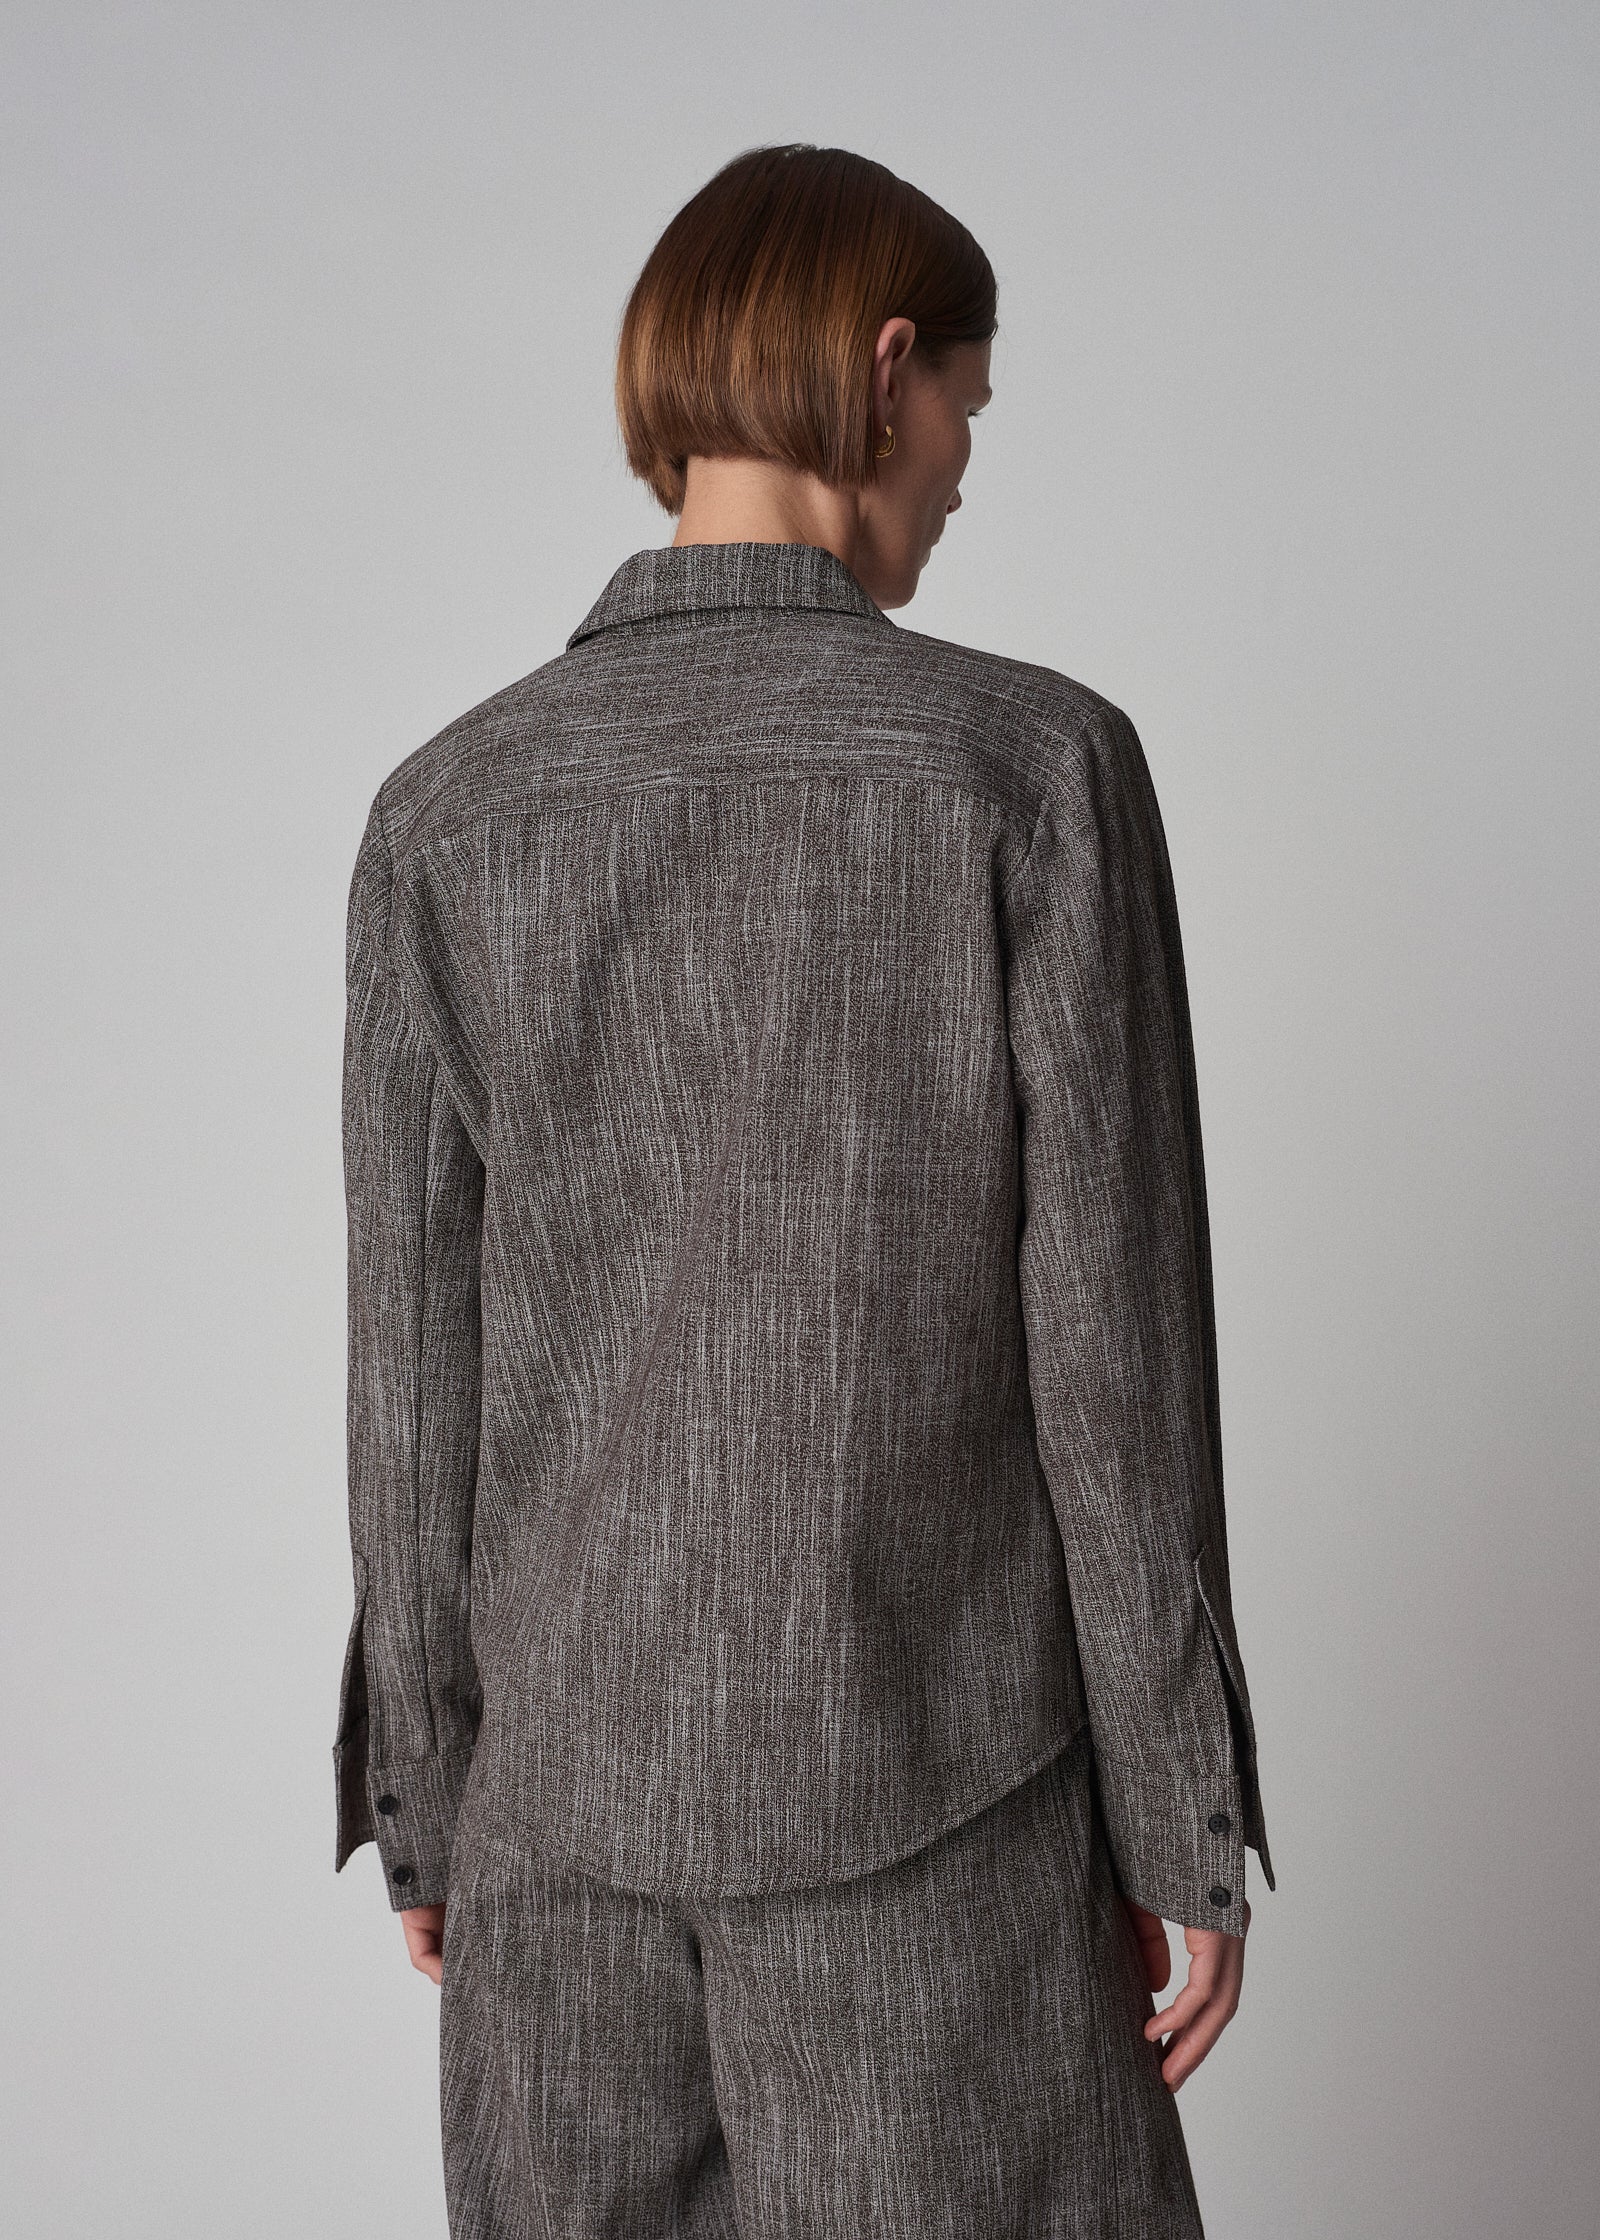 Patch Pocket Shirt in Virgin Wool - Coffee - CO Collections